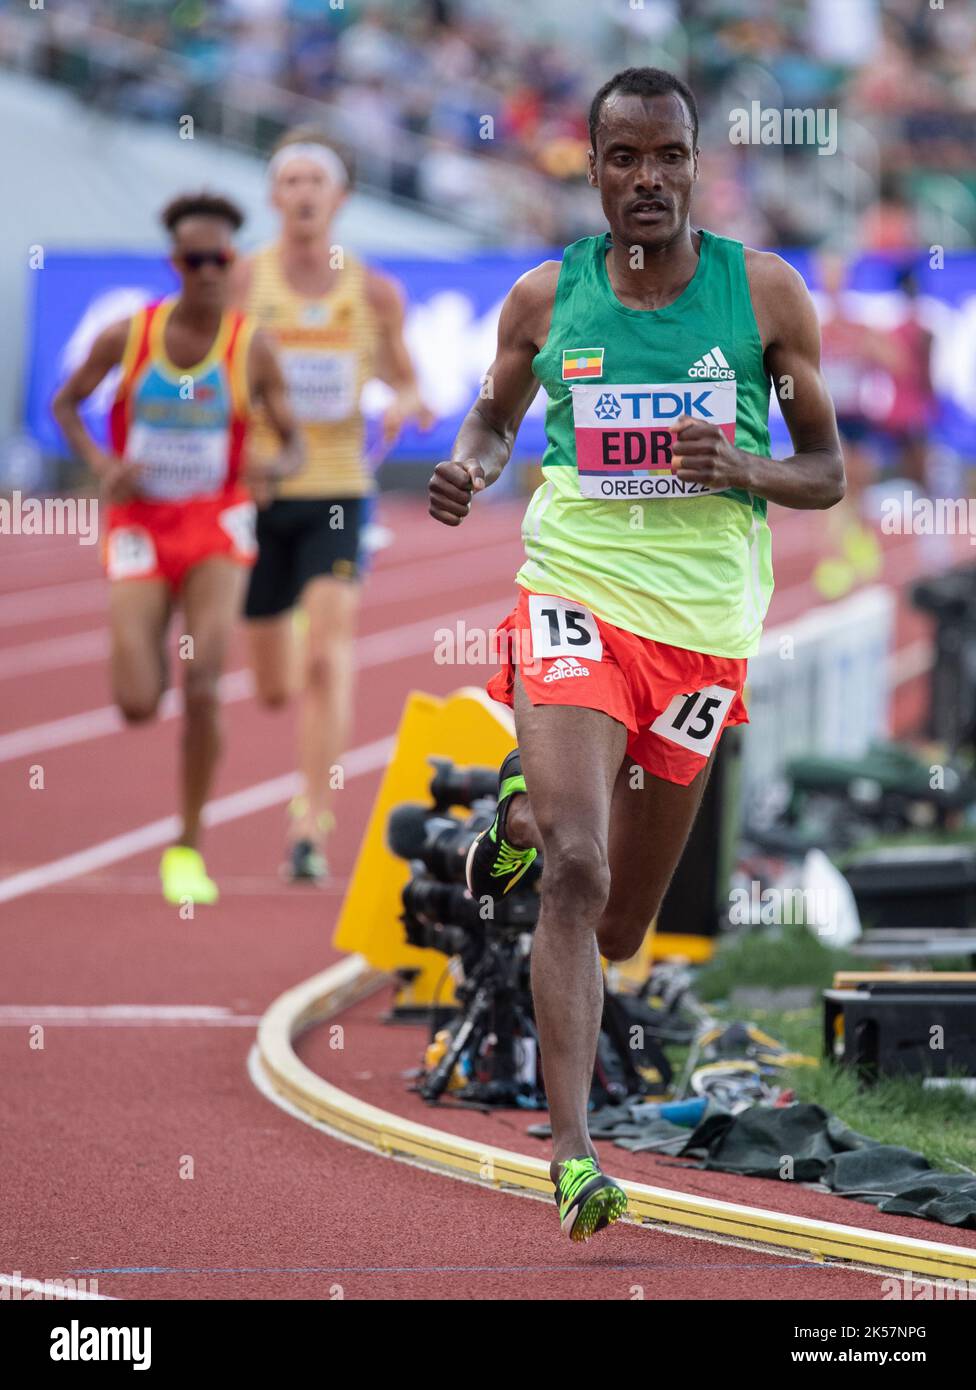 Muktar Edris of Ehiopia competing in the men’s 5000m heats at the World Athletics Championships, Hayward Field, Eugene, Oregon USA on the 21st July 20 Stock Photo